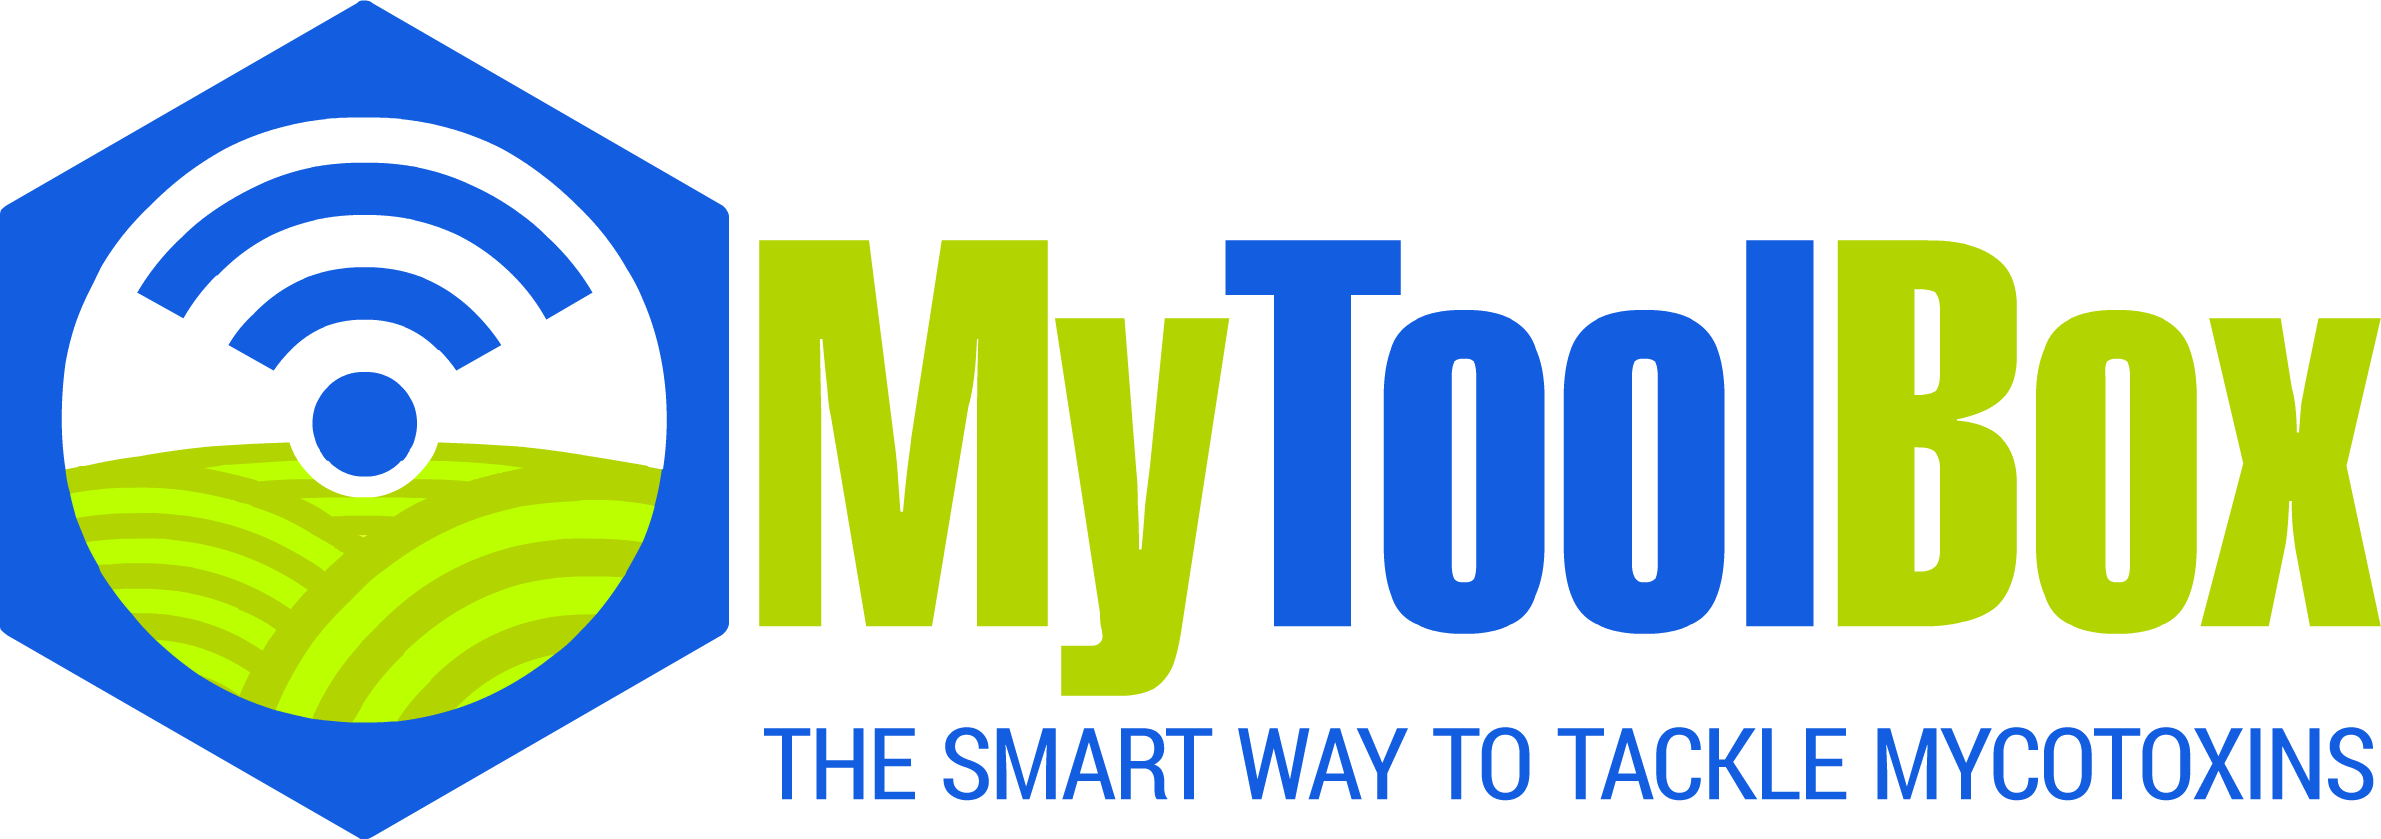 logo_mytoolbox_with_tagline_2381x839.png